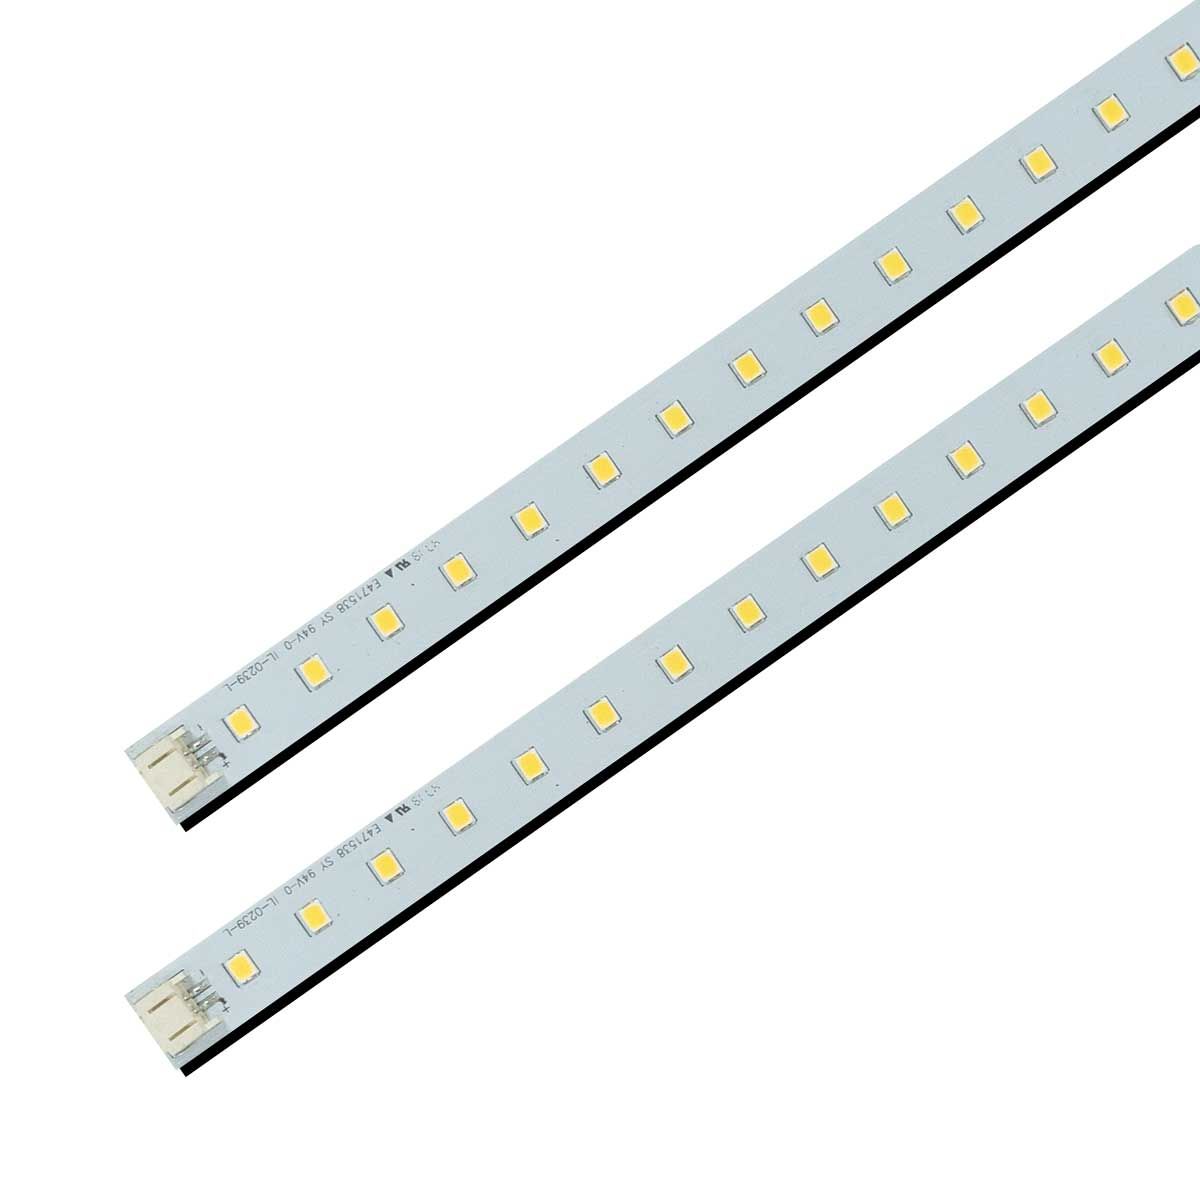 Fluorescent Lights To Led, Fluorescent Ceiling Fixtures